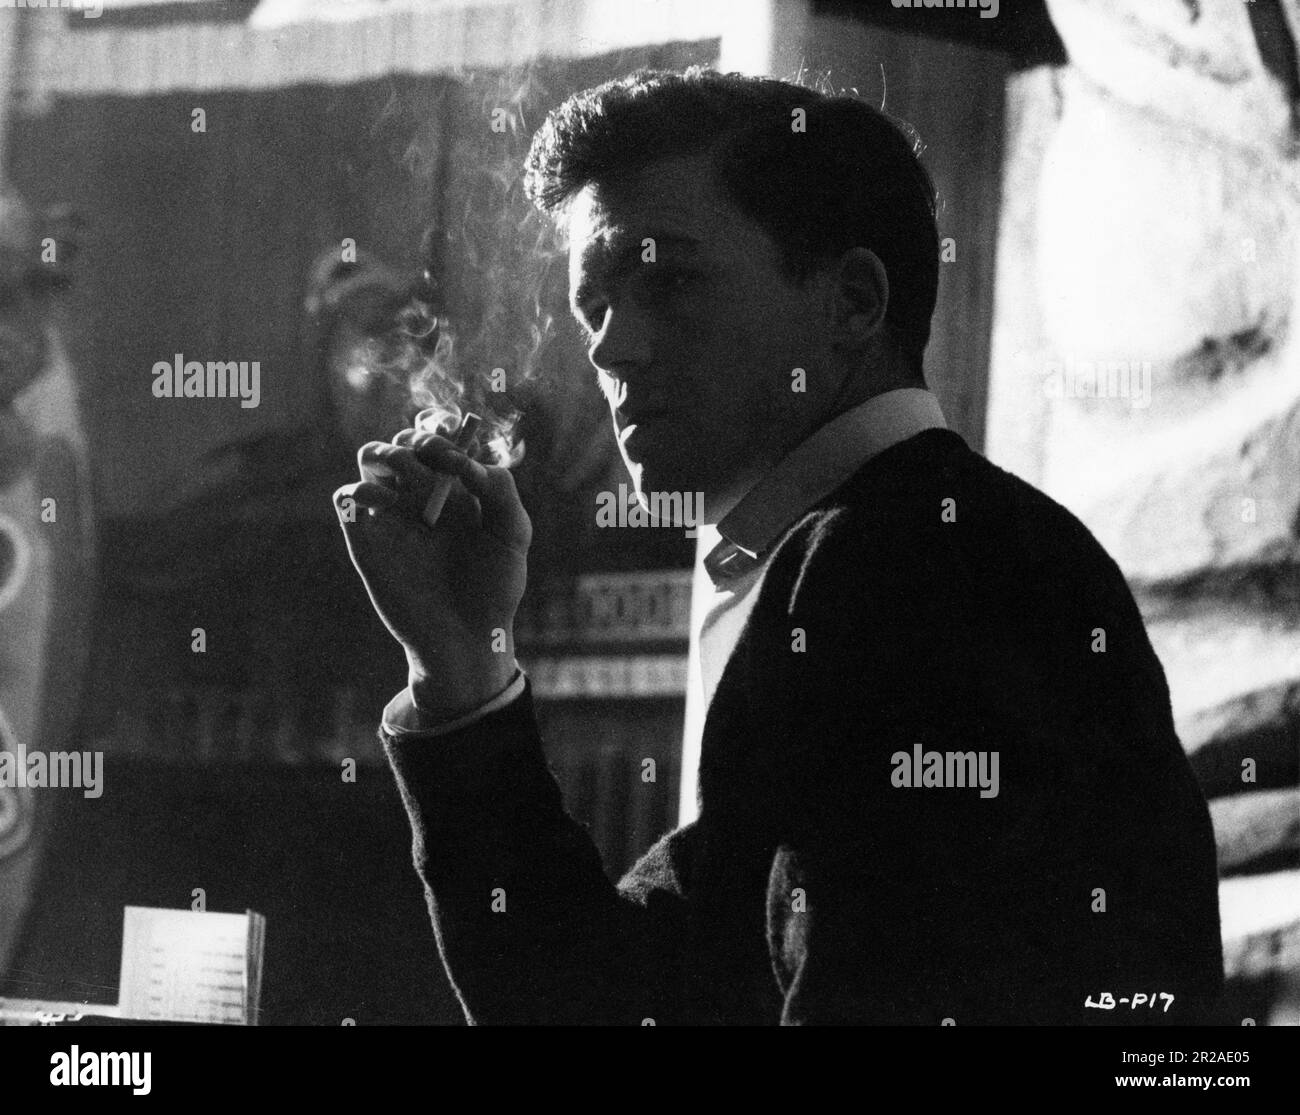 COLIN CAMPBELL in THE LEATHER BOYS 1964 director SIDNEY J. FURIE novel / screenplay Gillian Freeman Raymond Stross Productions / British Lion - Columbia Distributors (BLC) Stock Photo